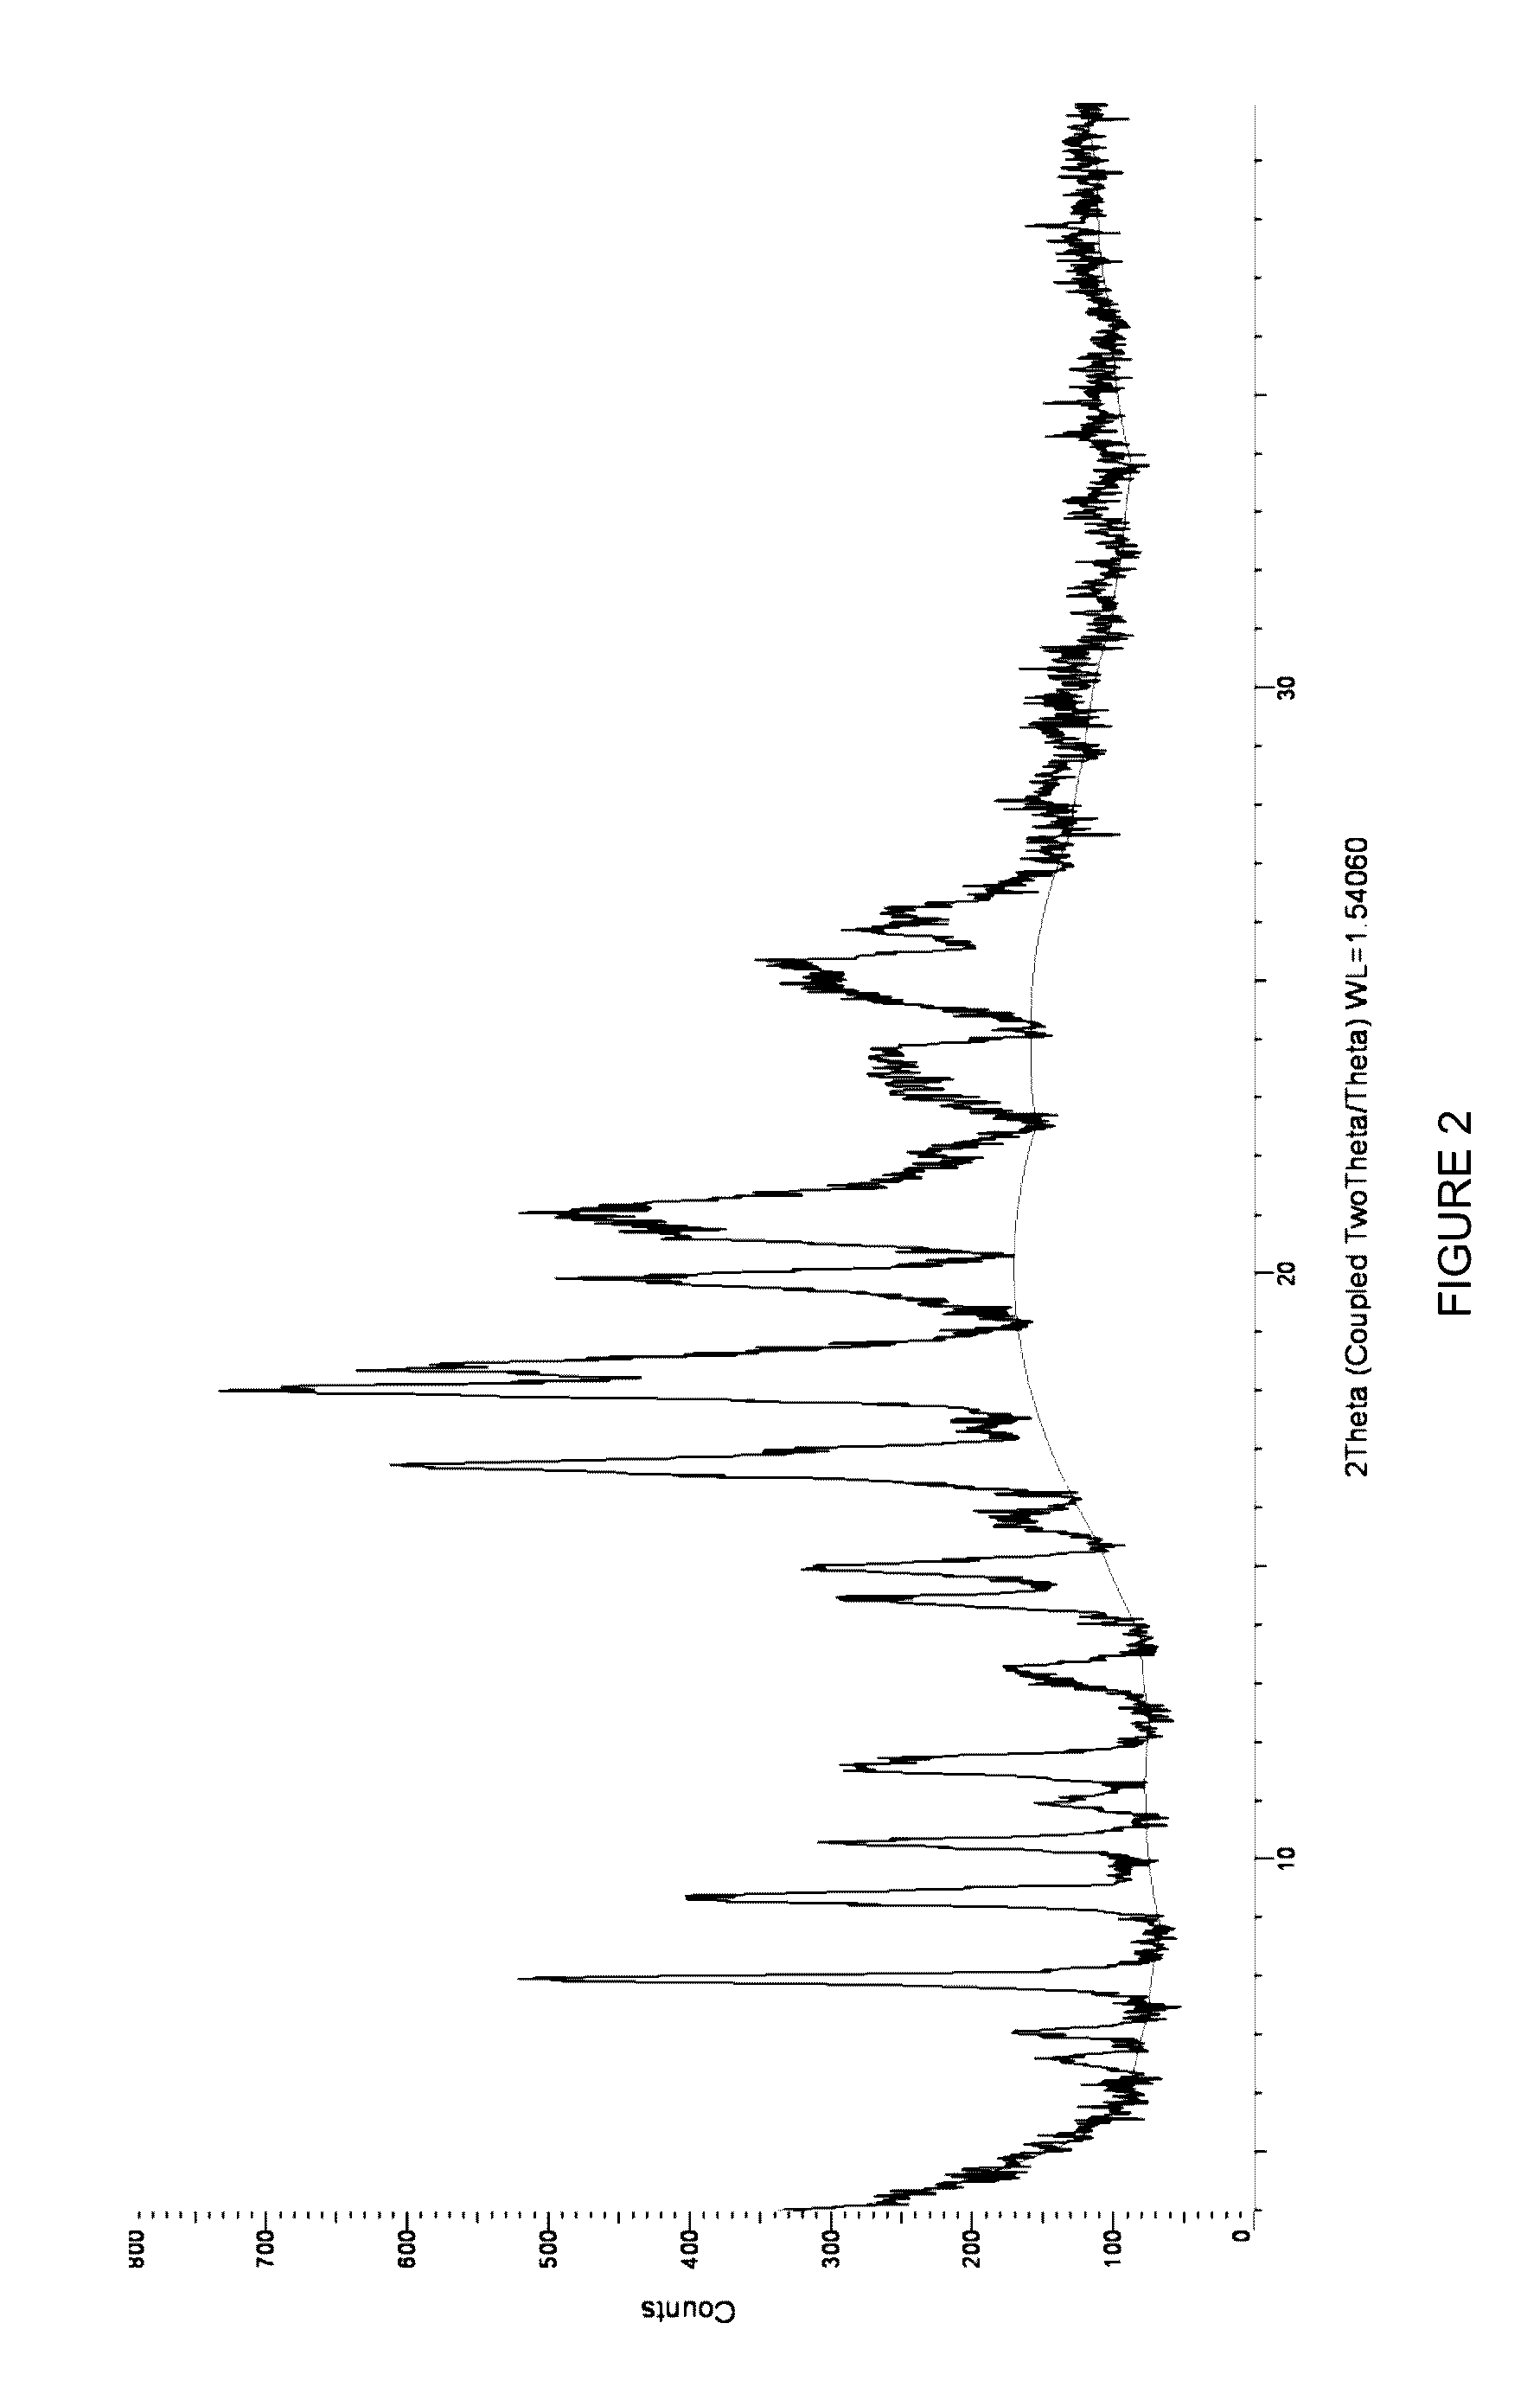 Bicyclic heterocycle compounds and their uses in therapy